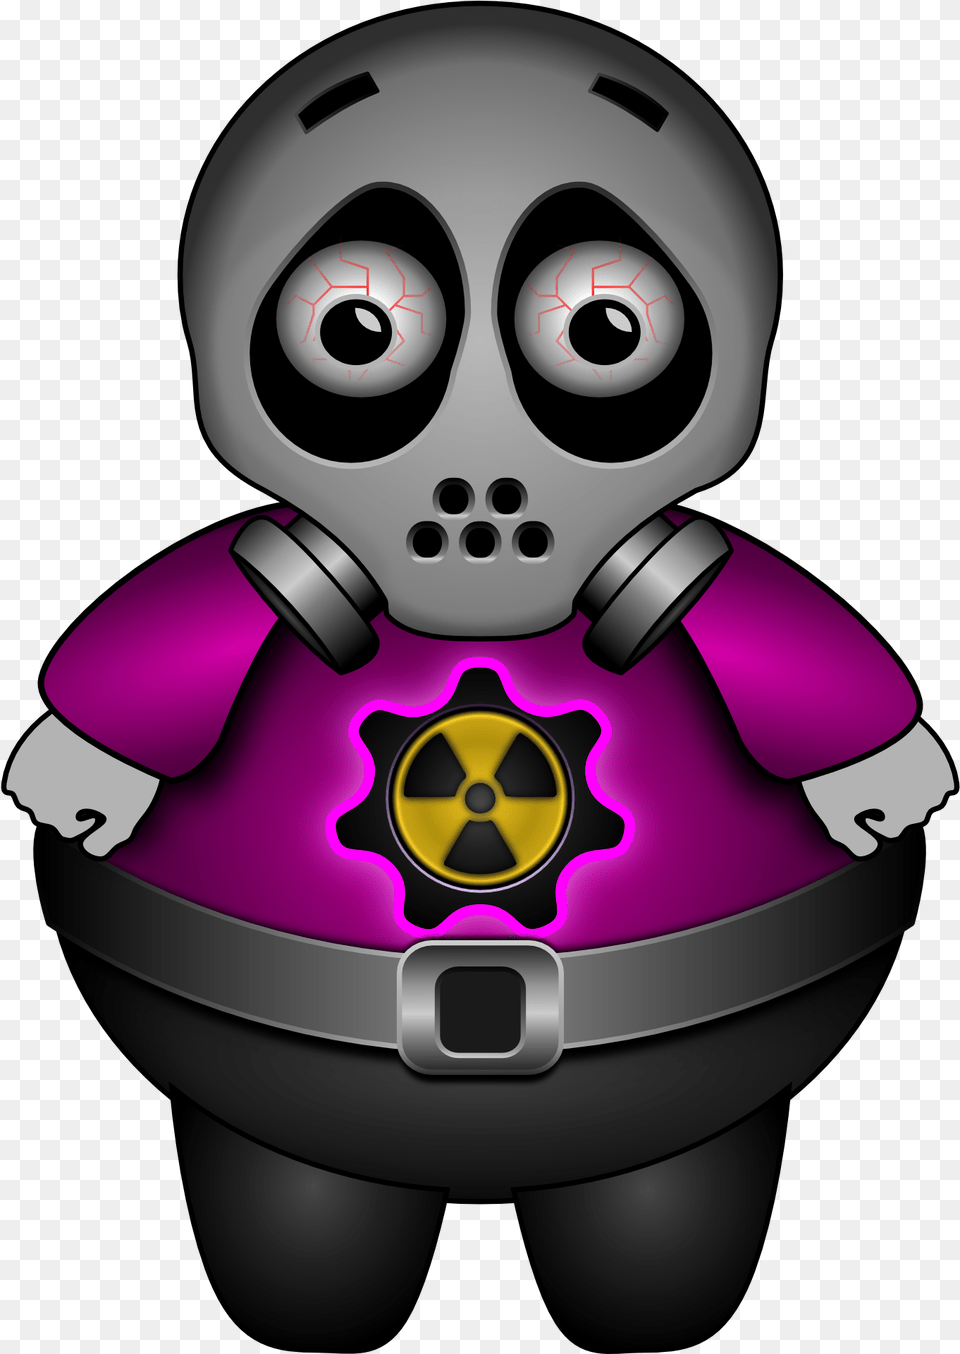 Alien Sad Gas Mask Atomic Radioactive Contaminated Outer Space Memory Game, Robot, Baby, Person Free Png Download